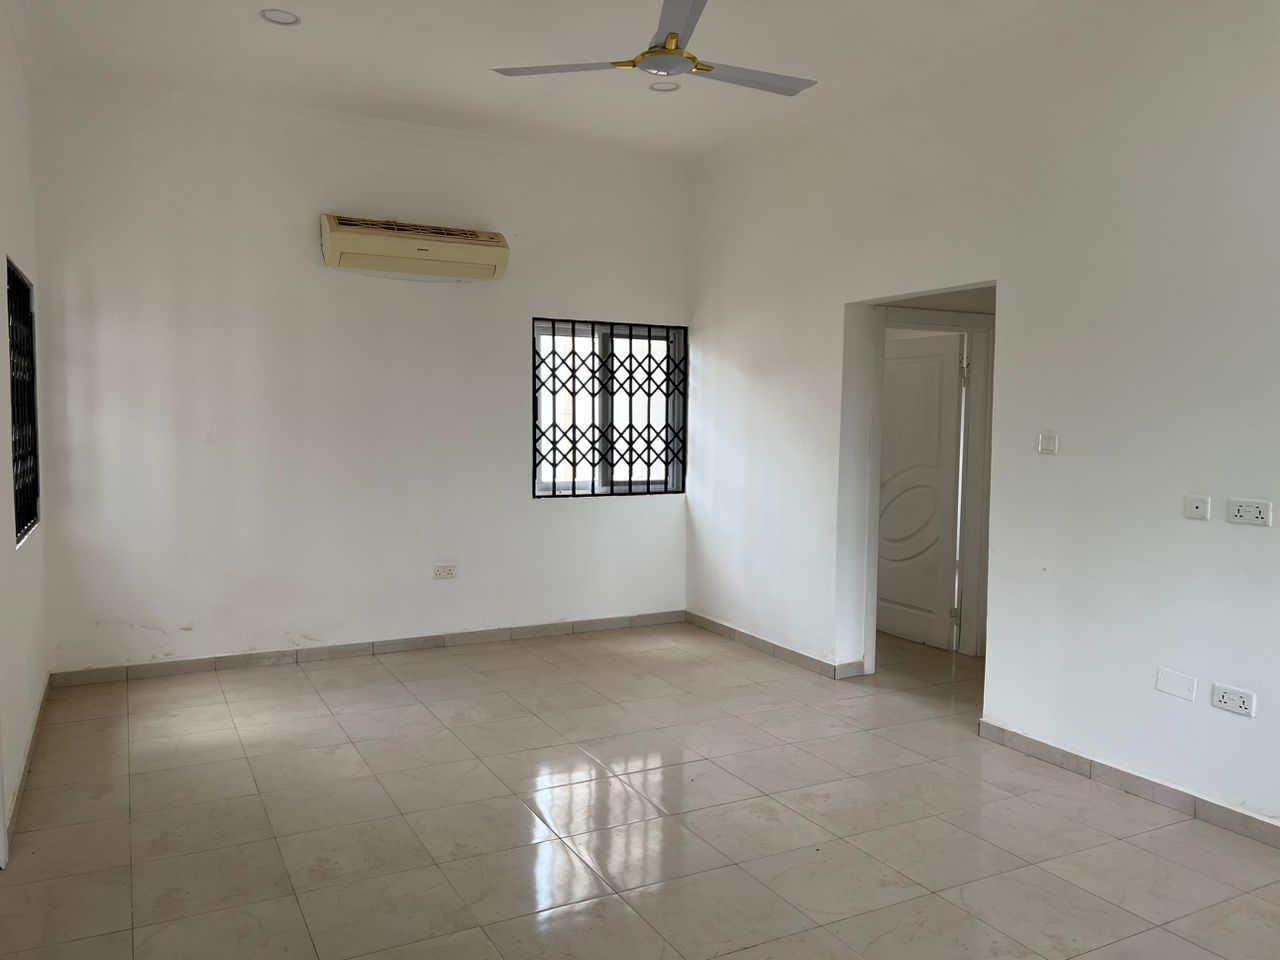 Two 2-bedroom House in a Gated Community for Sale at Oyarifa